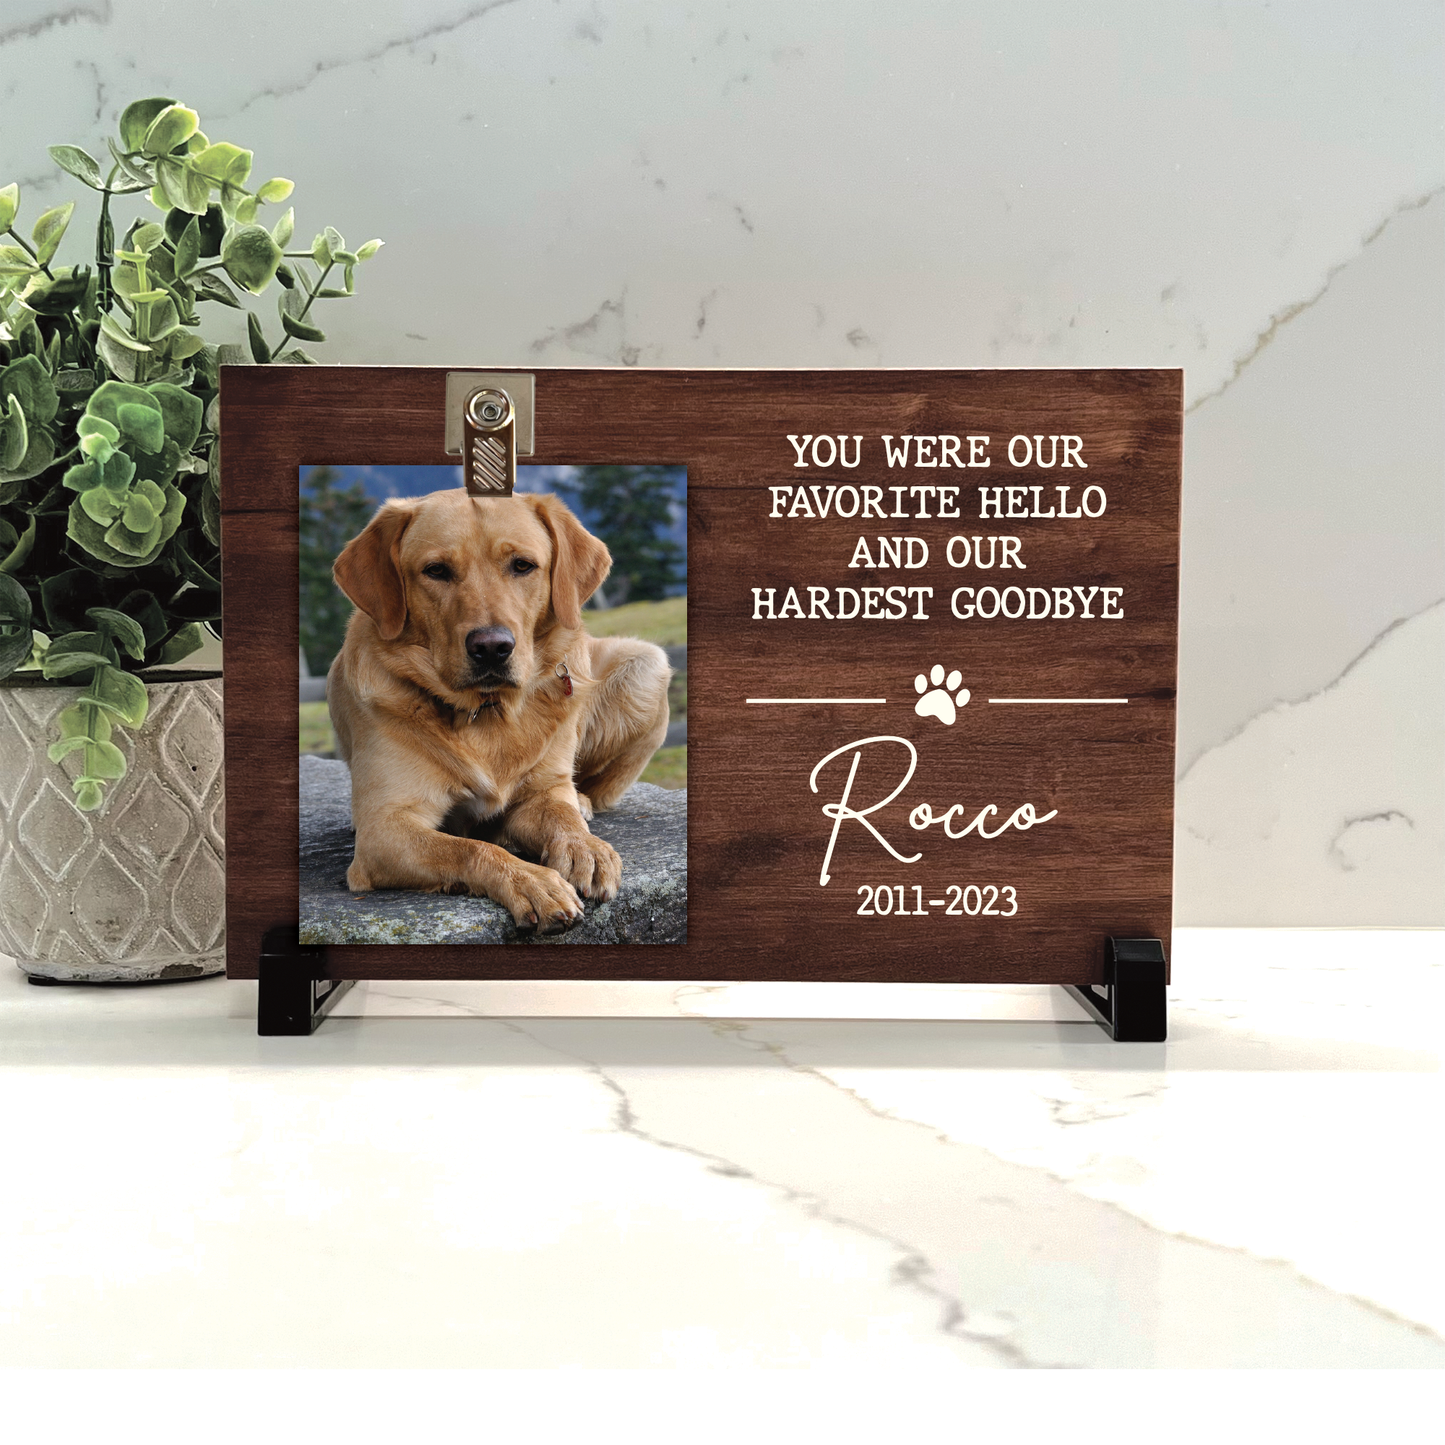 Dog Memorial Frame - You were our favorite hello and our hardest goodbye